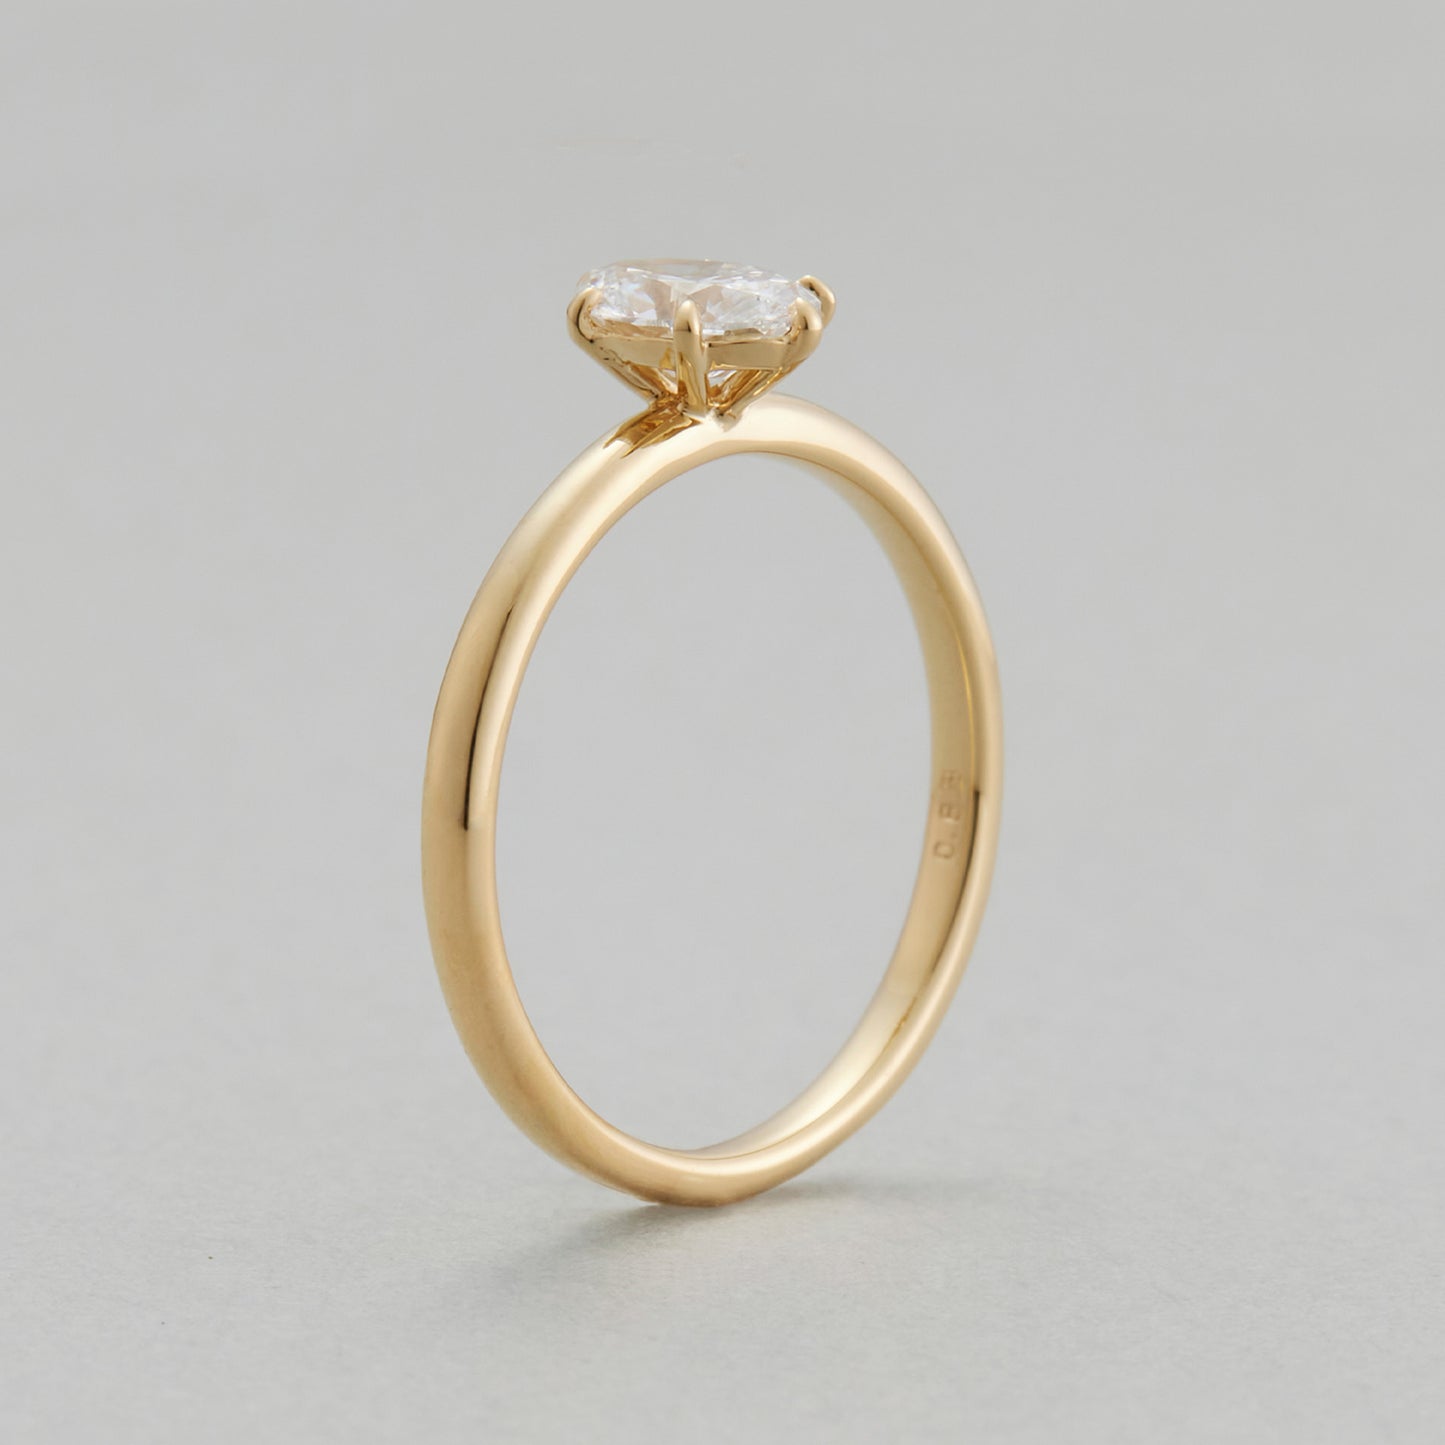 HA SIMPLY Oval Ring / K18 Yellow Gold / 0.5 ~ 0.6 Carat